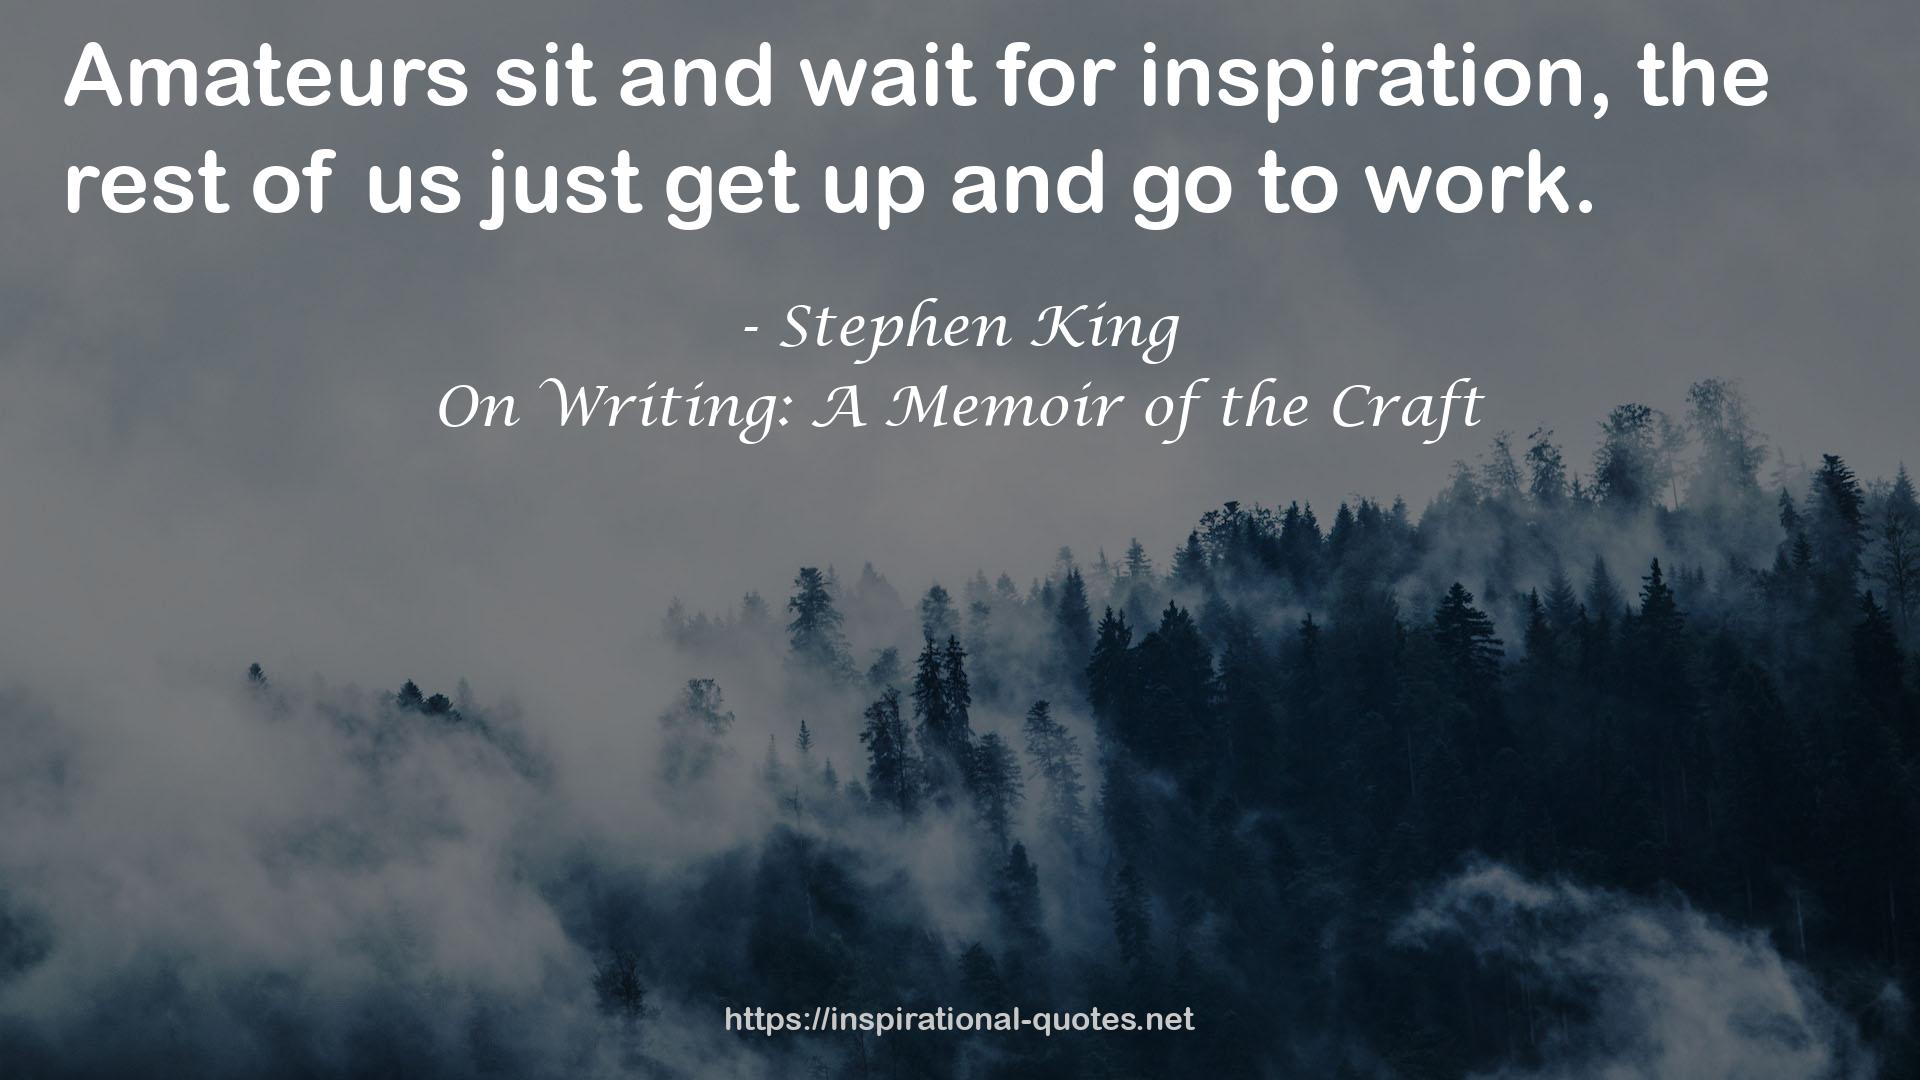 On Writing: A Memoir of the Craft QUOTES